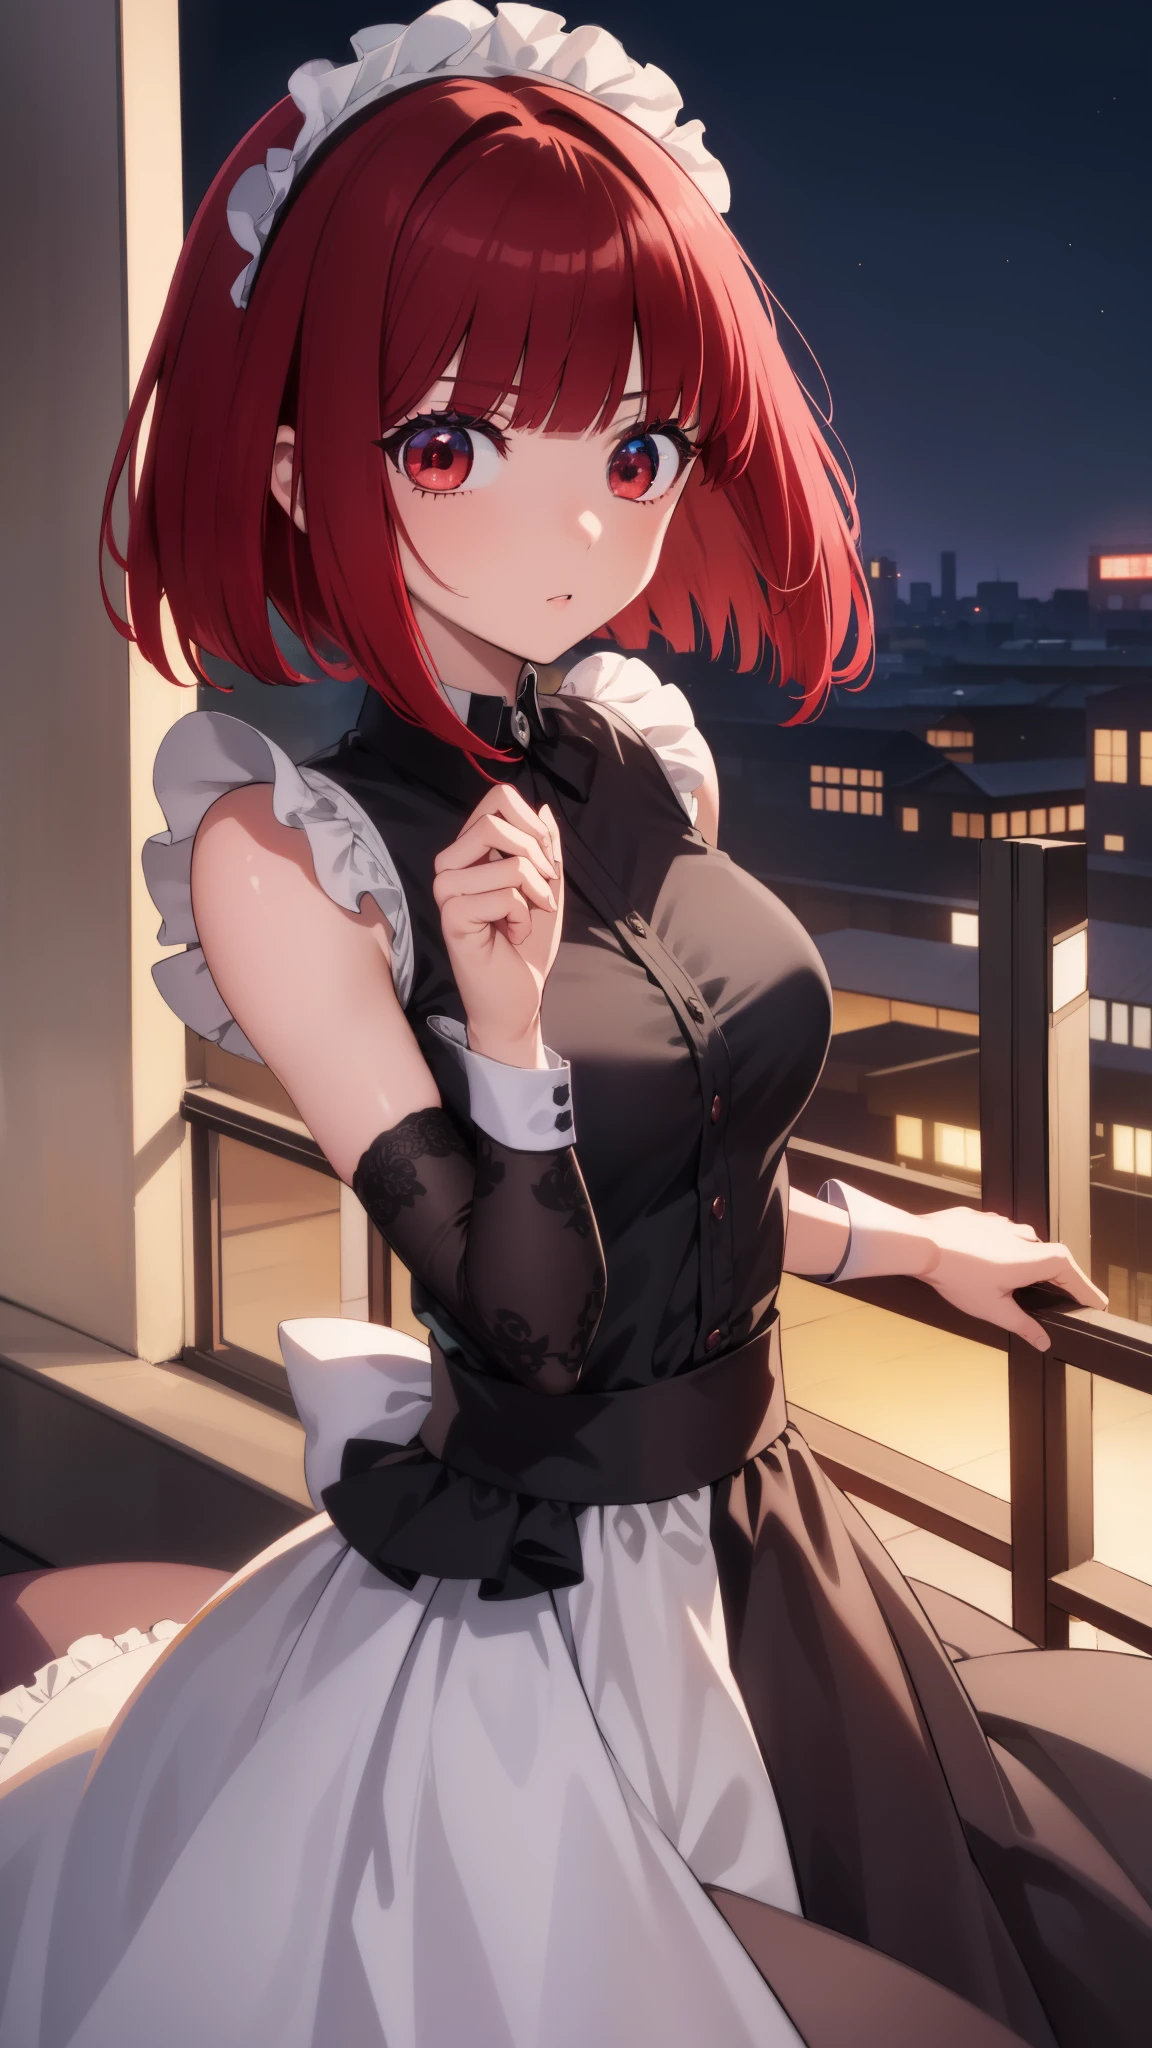 Arima maybe, Arima maybe, bob cut, (red eyes:1.5), redhead, short hair, , Maid clothes,ruffle skirt，Gothic Lolita，hair in the wind，、，
break looking at viewer,
break indoors, mansion,
break (masterpiece:1.2), highest quality, High resolution, unity 8k wallpaper, (shape:0.8), (beautiful and detailed eyes:1.6), highly detailed face, perfect lighting, Very detailed CG, (perfect hands, perfect anatomy),